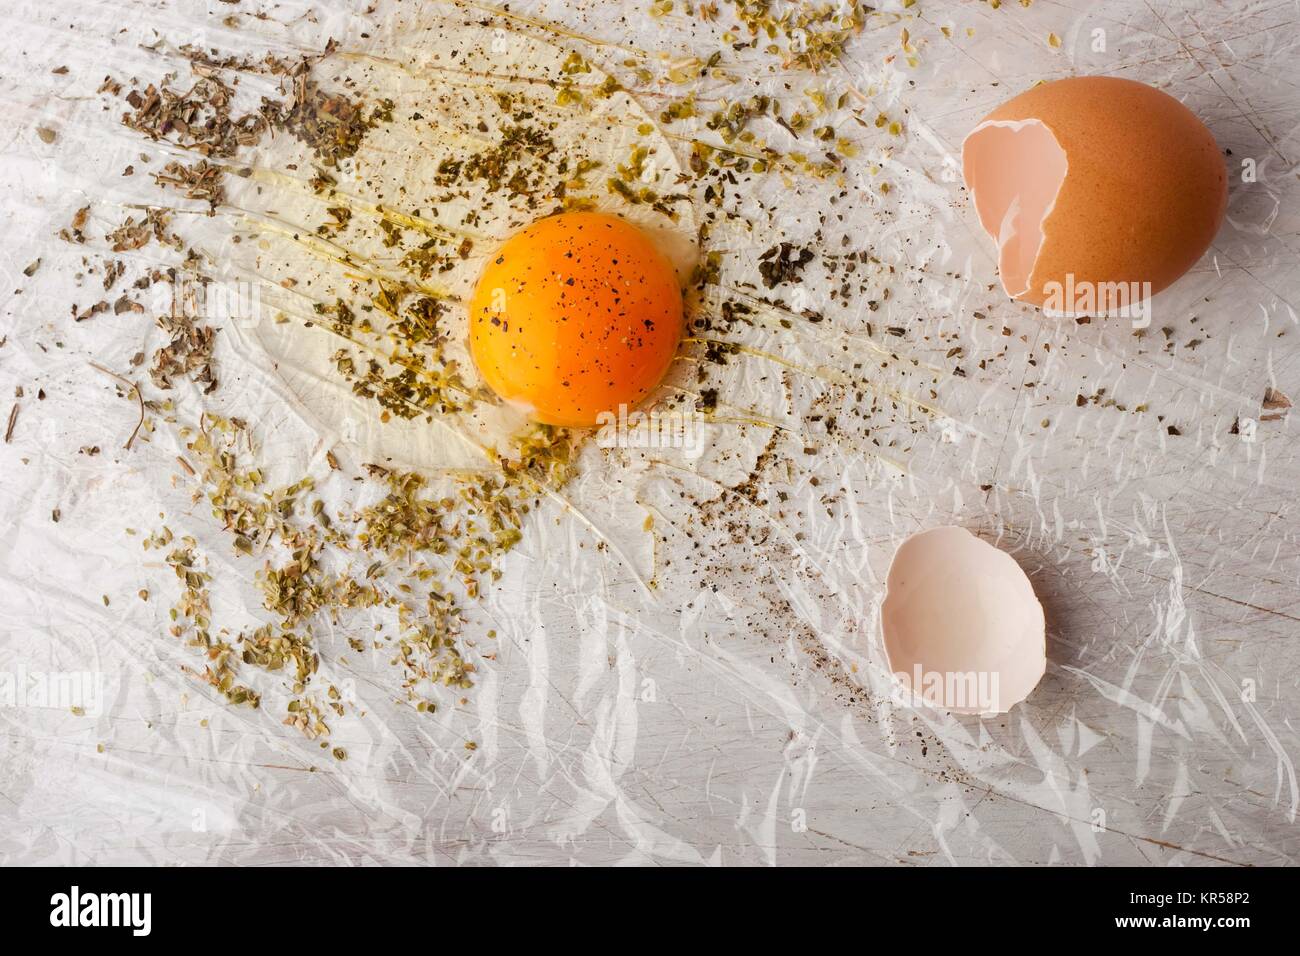 Broken egg with herbs mix on the white table Stock Photo